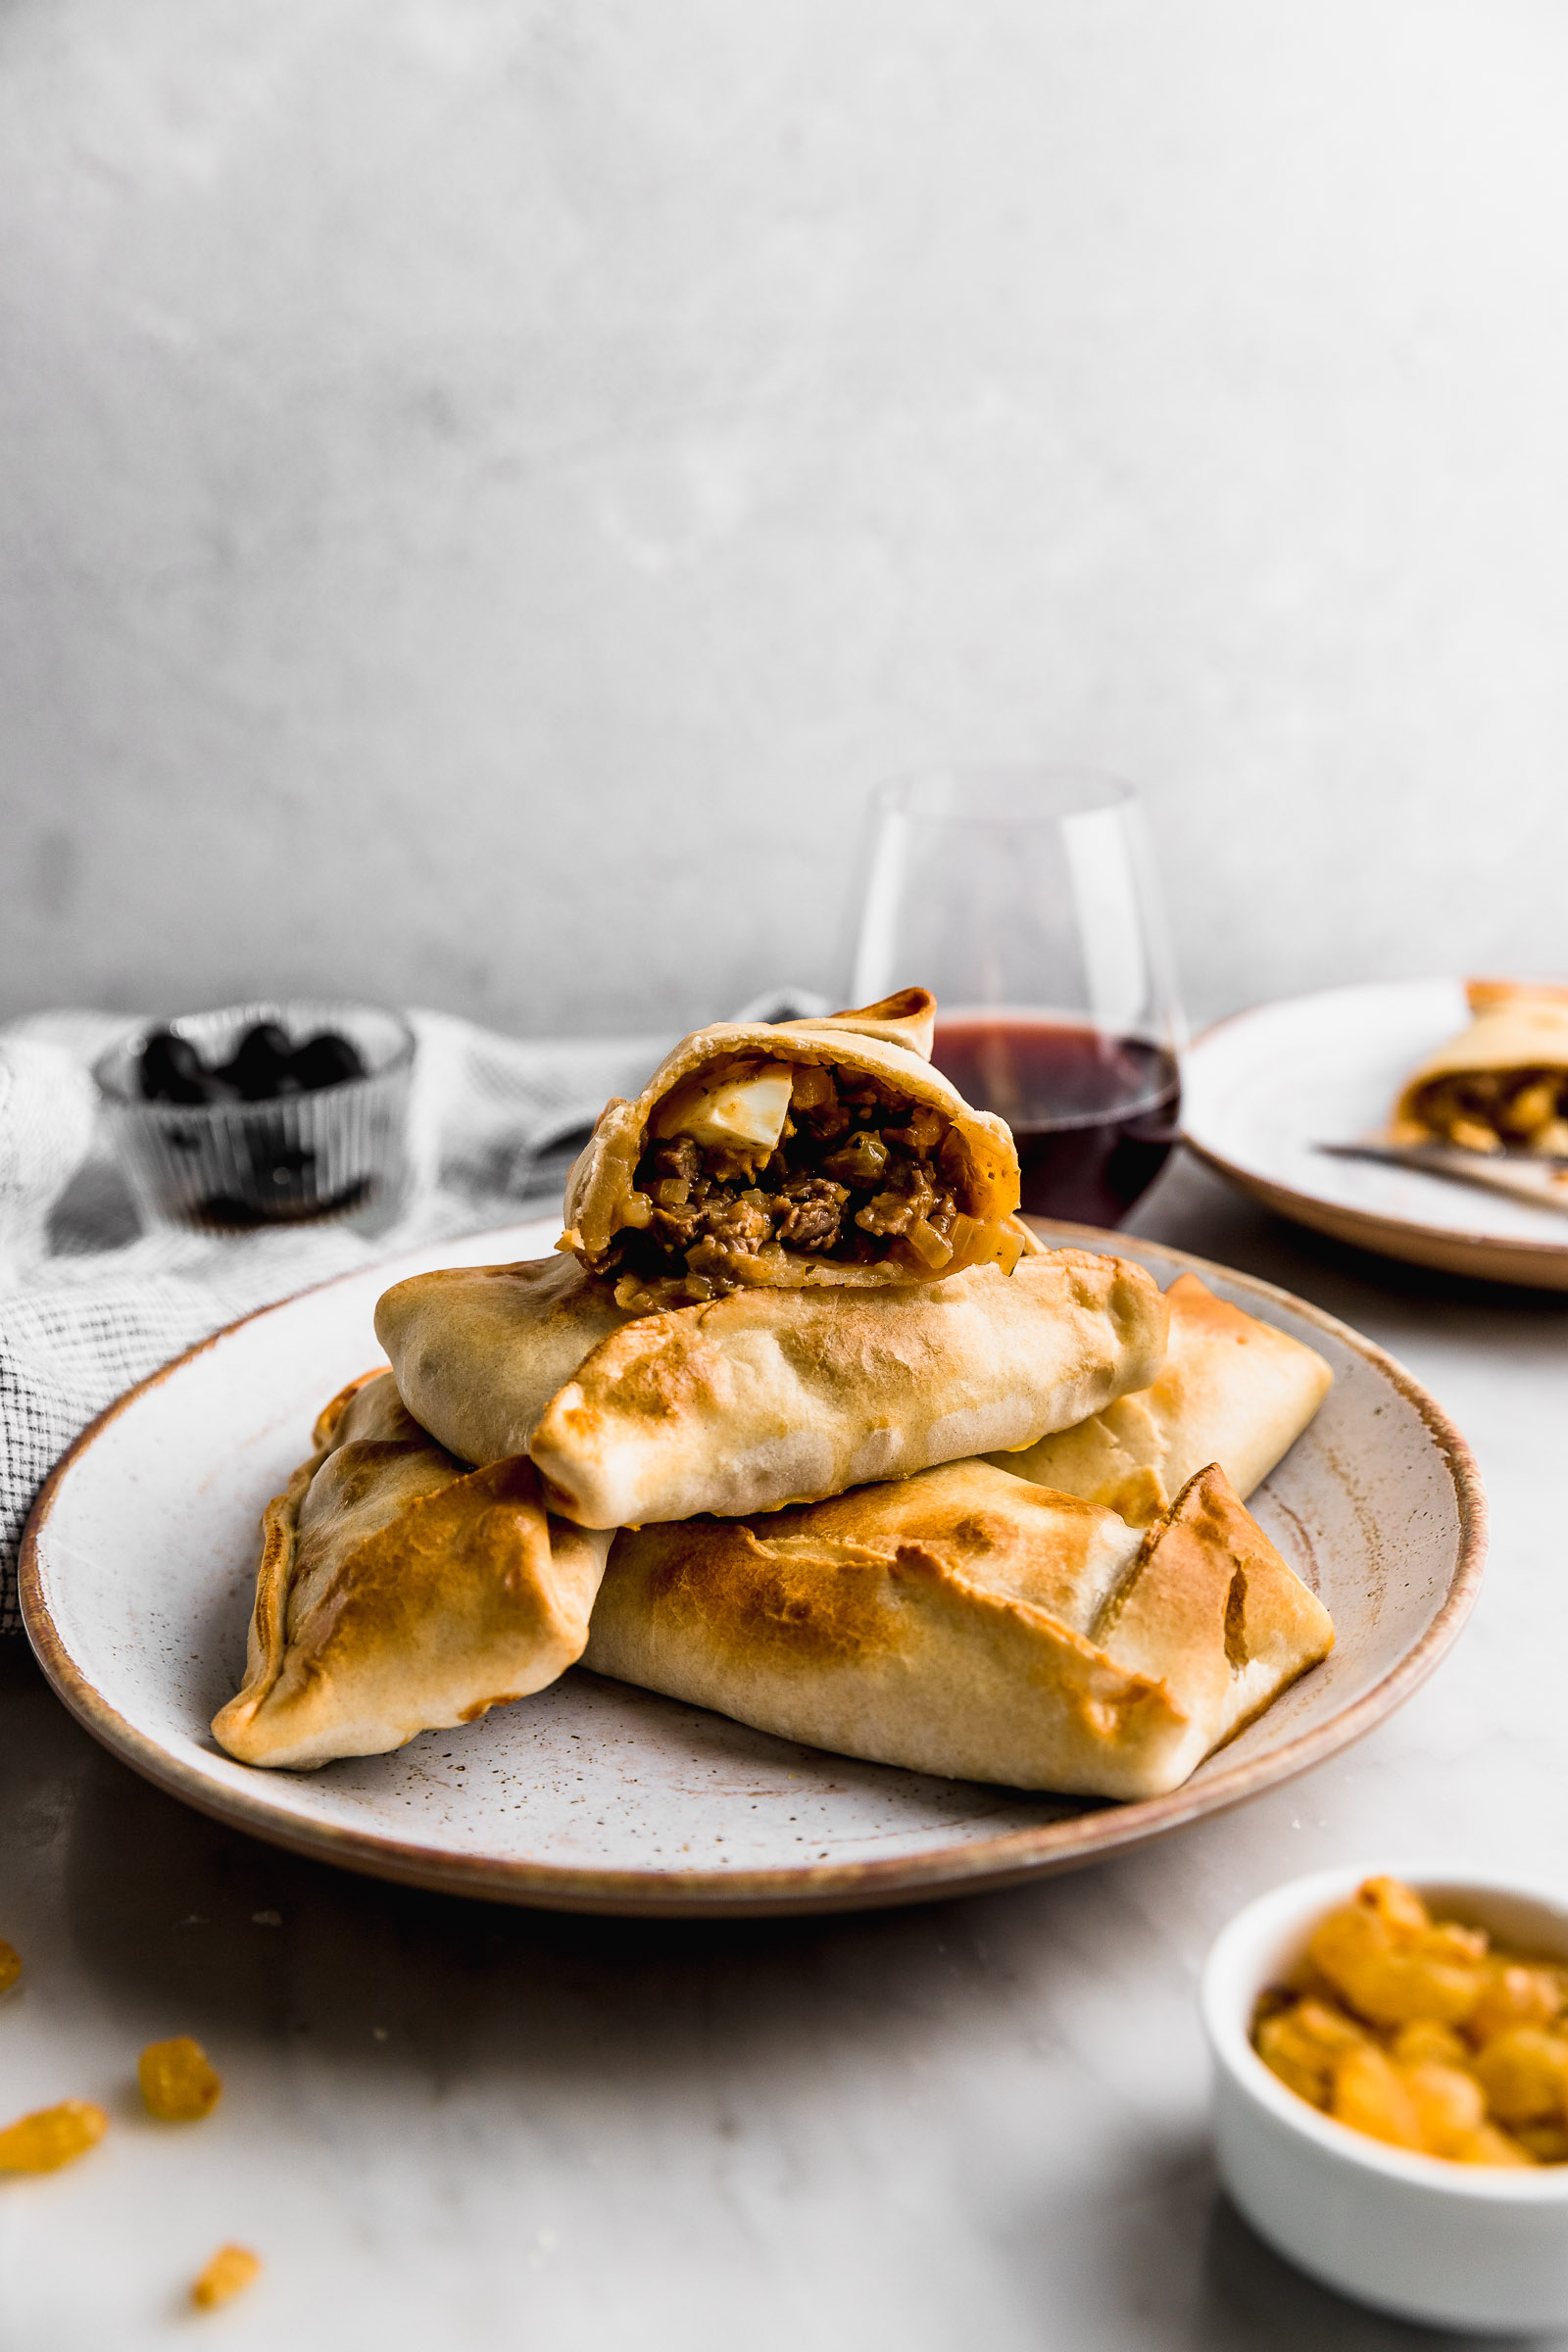 Photo of Chilean Empanadas (Empanadas de Pino). There are 5 empanadas forming a pyramid, and the one on top is cut in half so that you can see the filling of onion, beef, raisins and a quarter of a hard-boiled egg.